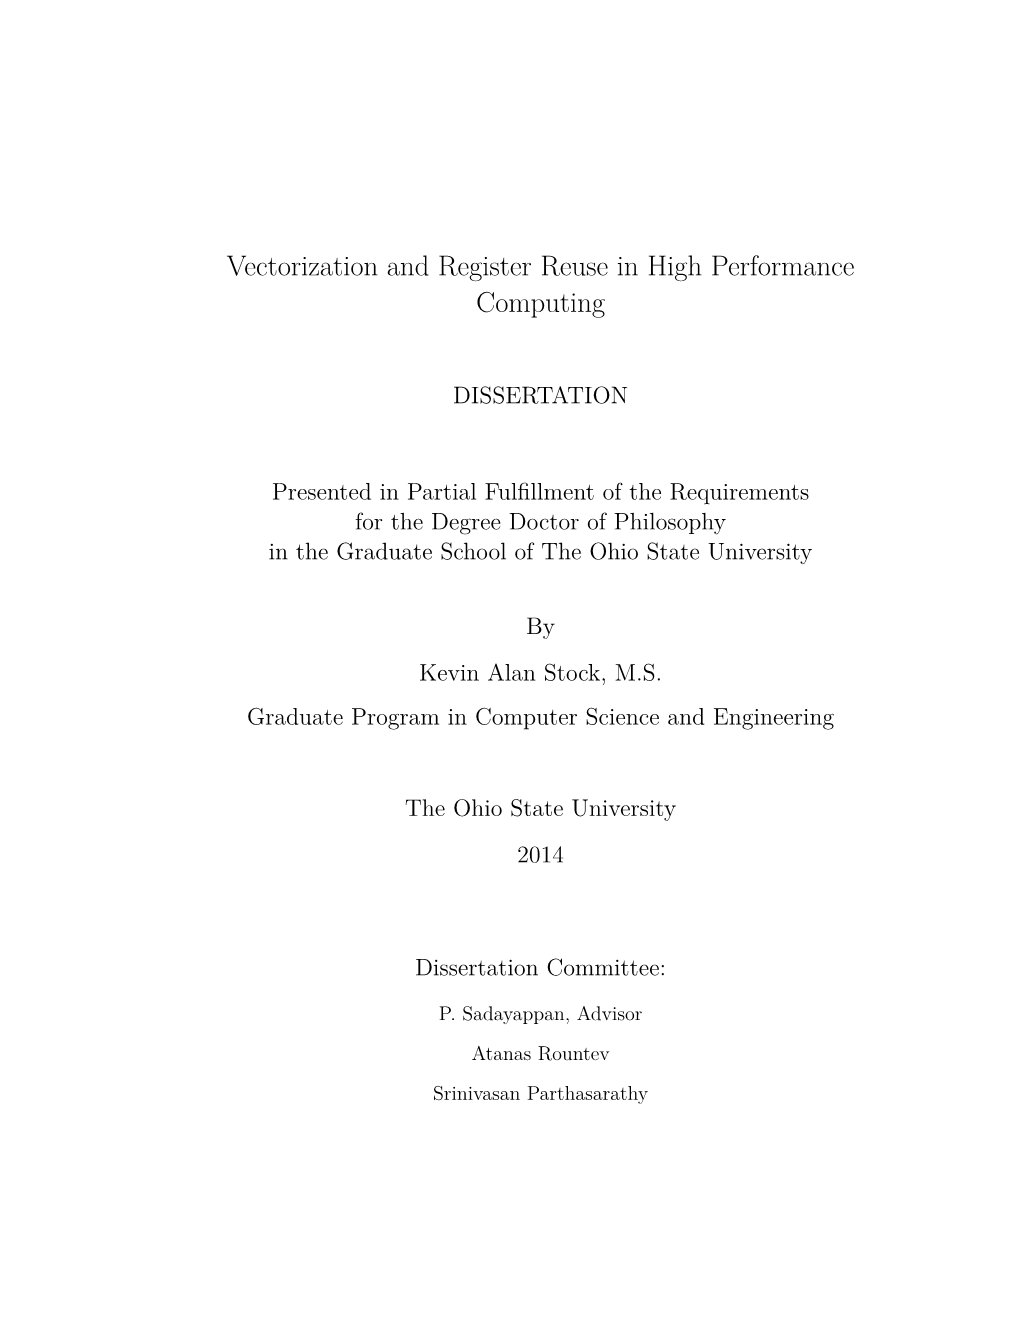 Vectorization and Register Reuse in High Performance Computing